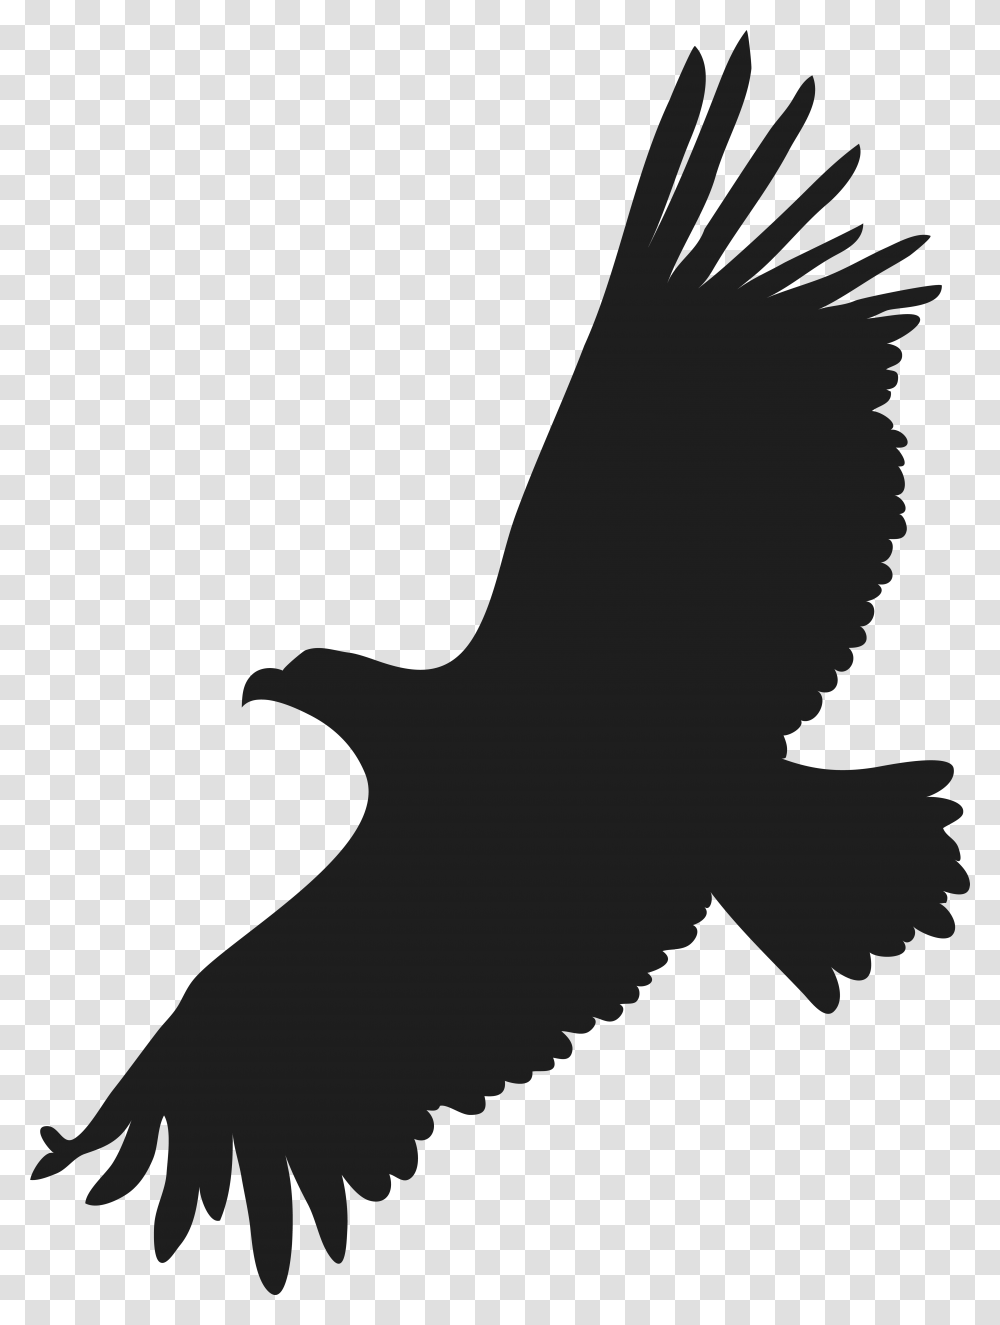 Flying Eagle Clip Art Image Flying Eagle Silhouette, Animal, Reptile, Bird, Gecko Transparent Png